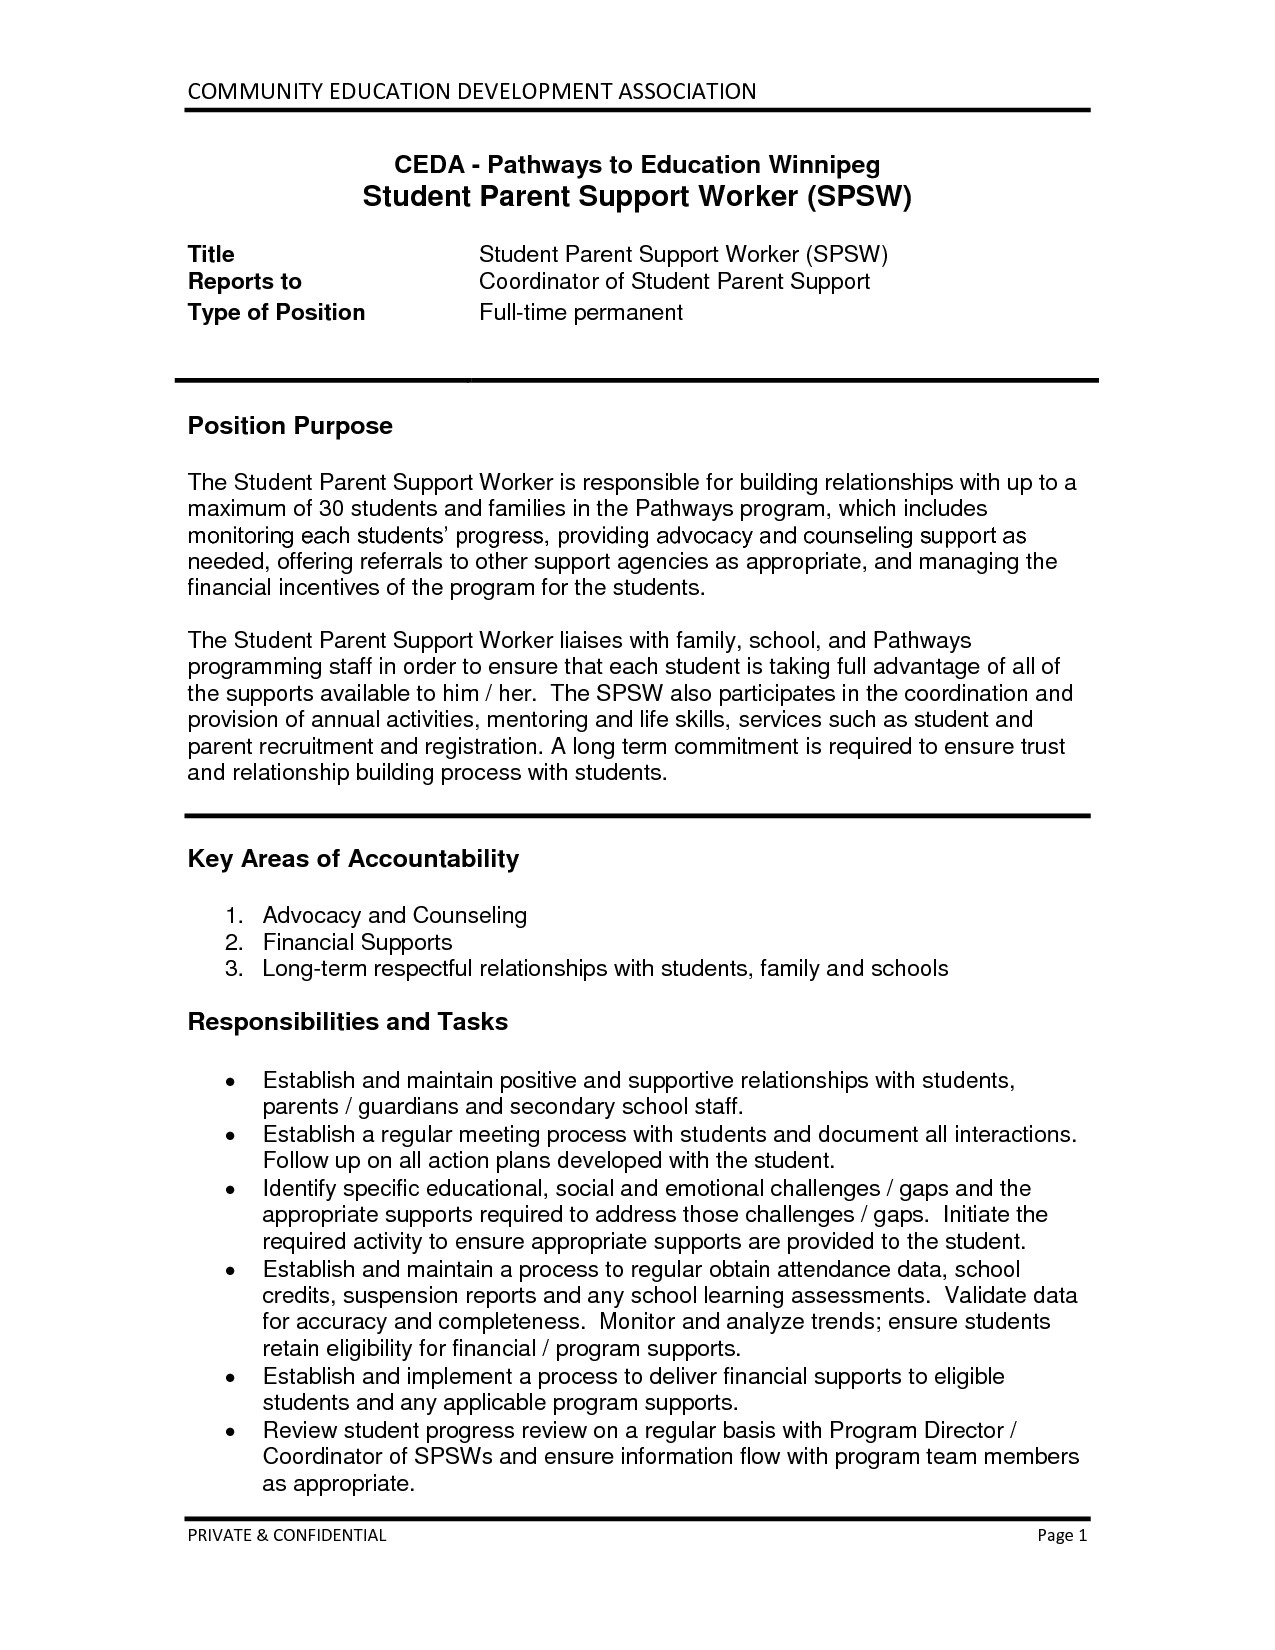 07 2010 cover letter family support worker 7867